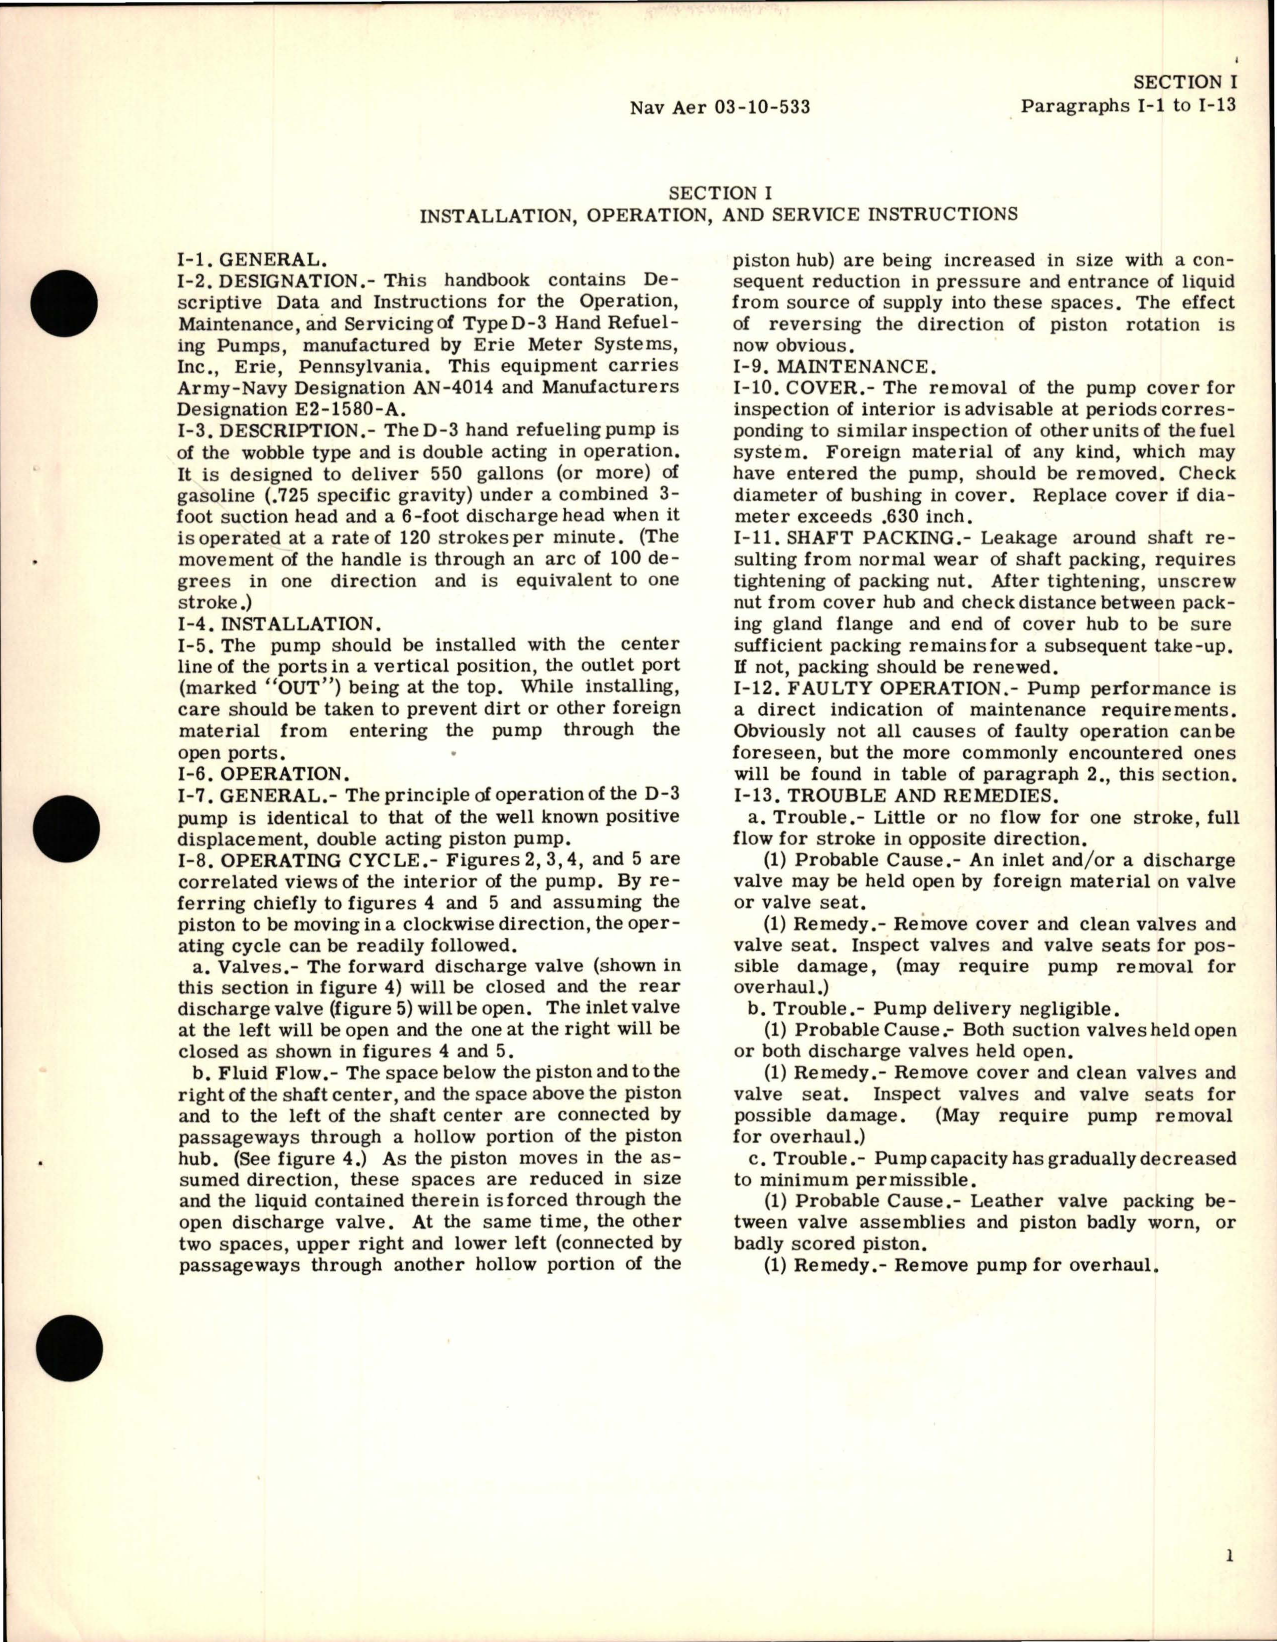 Sample page 5 from AirCorps Library document: Operation, Service and Overhaul Instructions with Parts Catalog for Hand Fuel Pump - E2-1580-A 